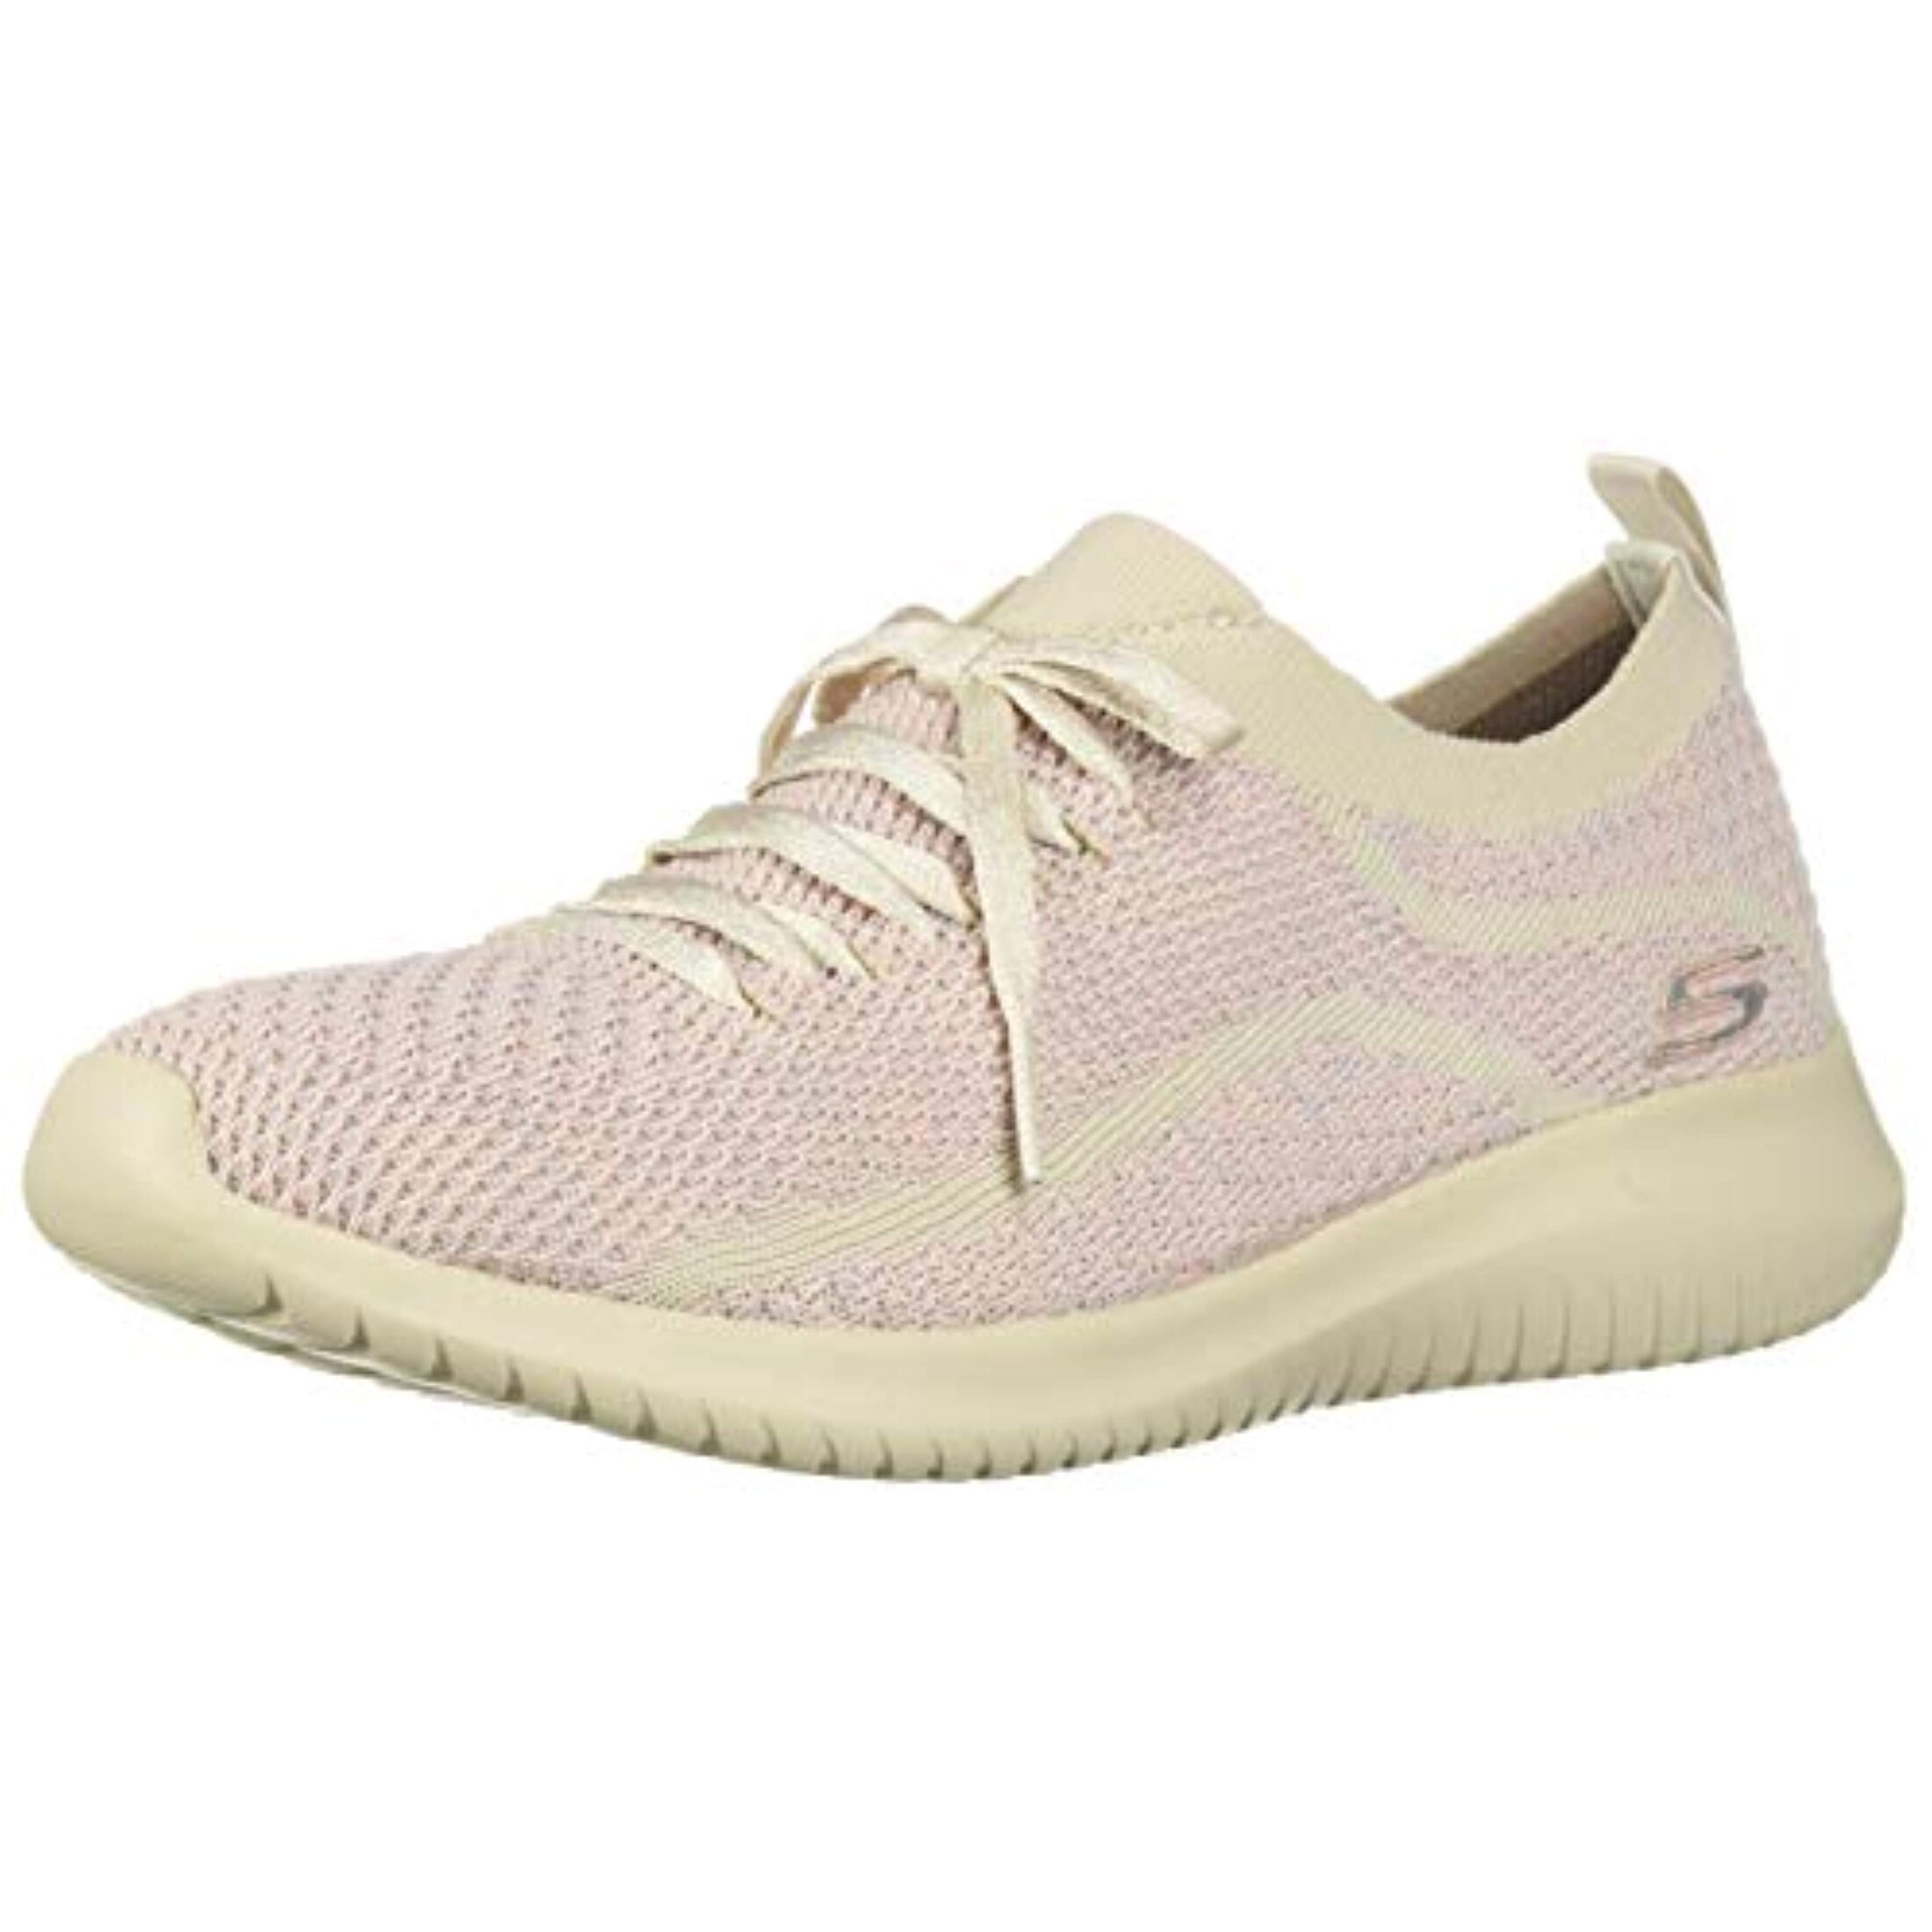 looking for pink shoes